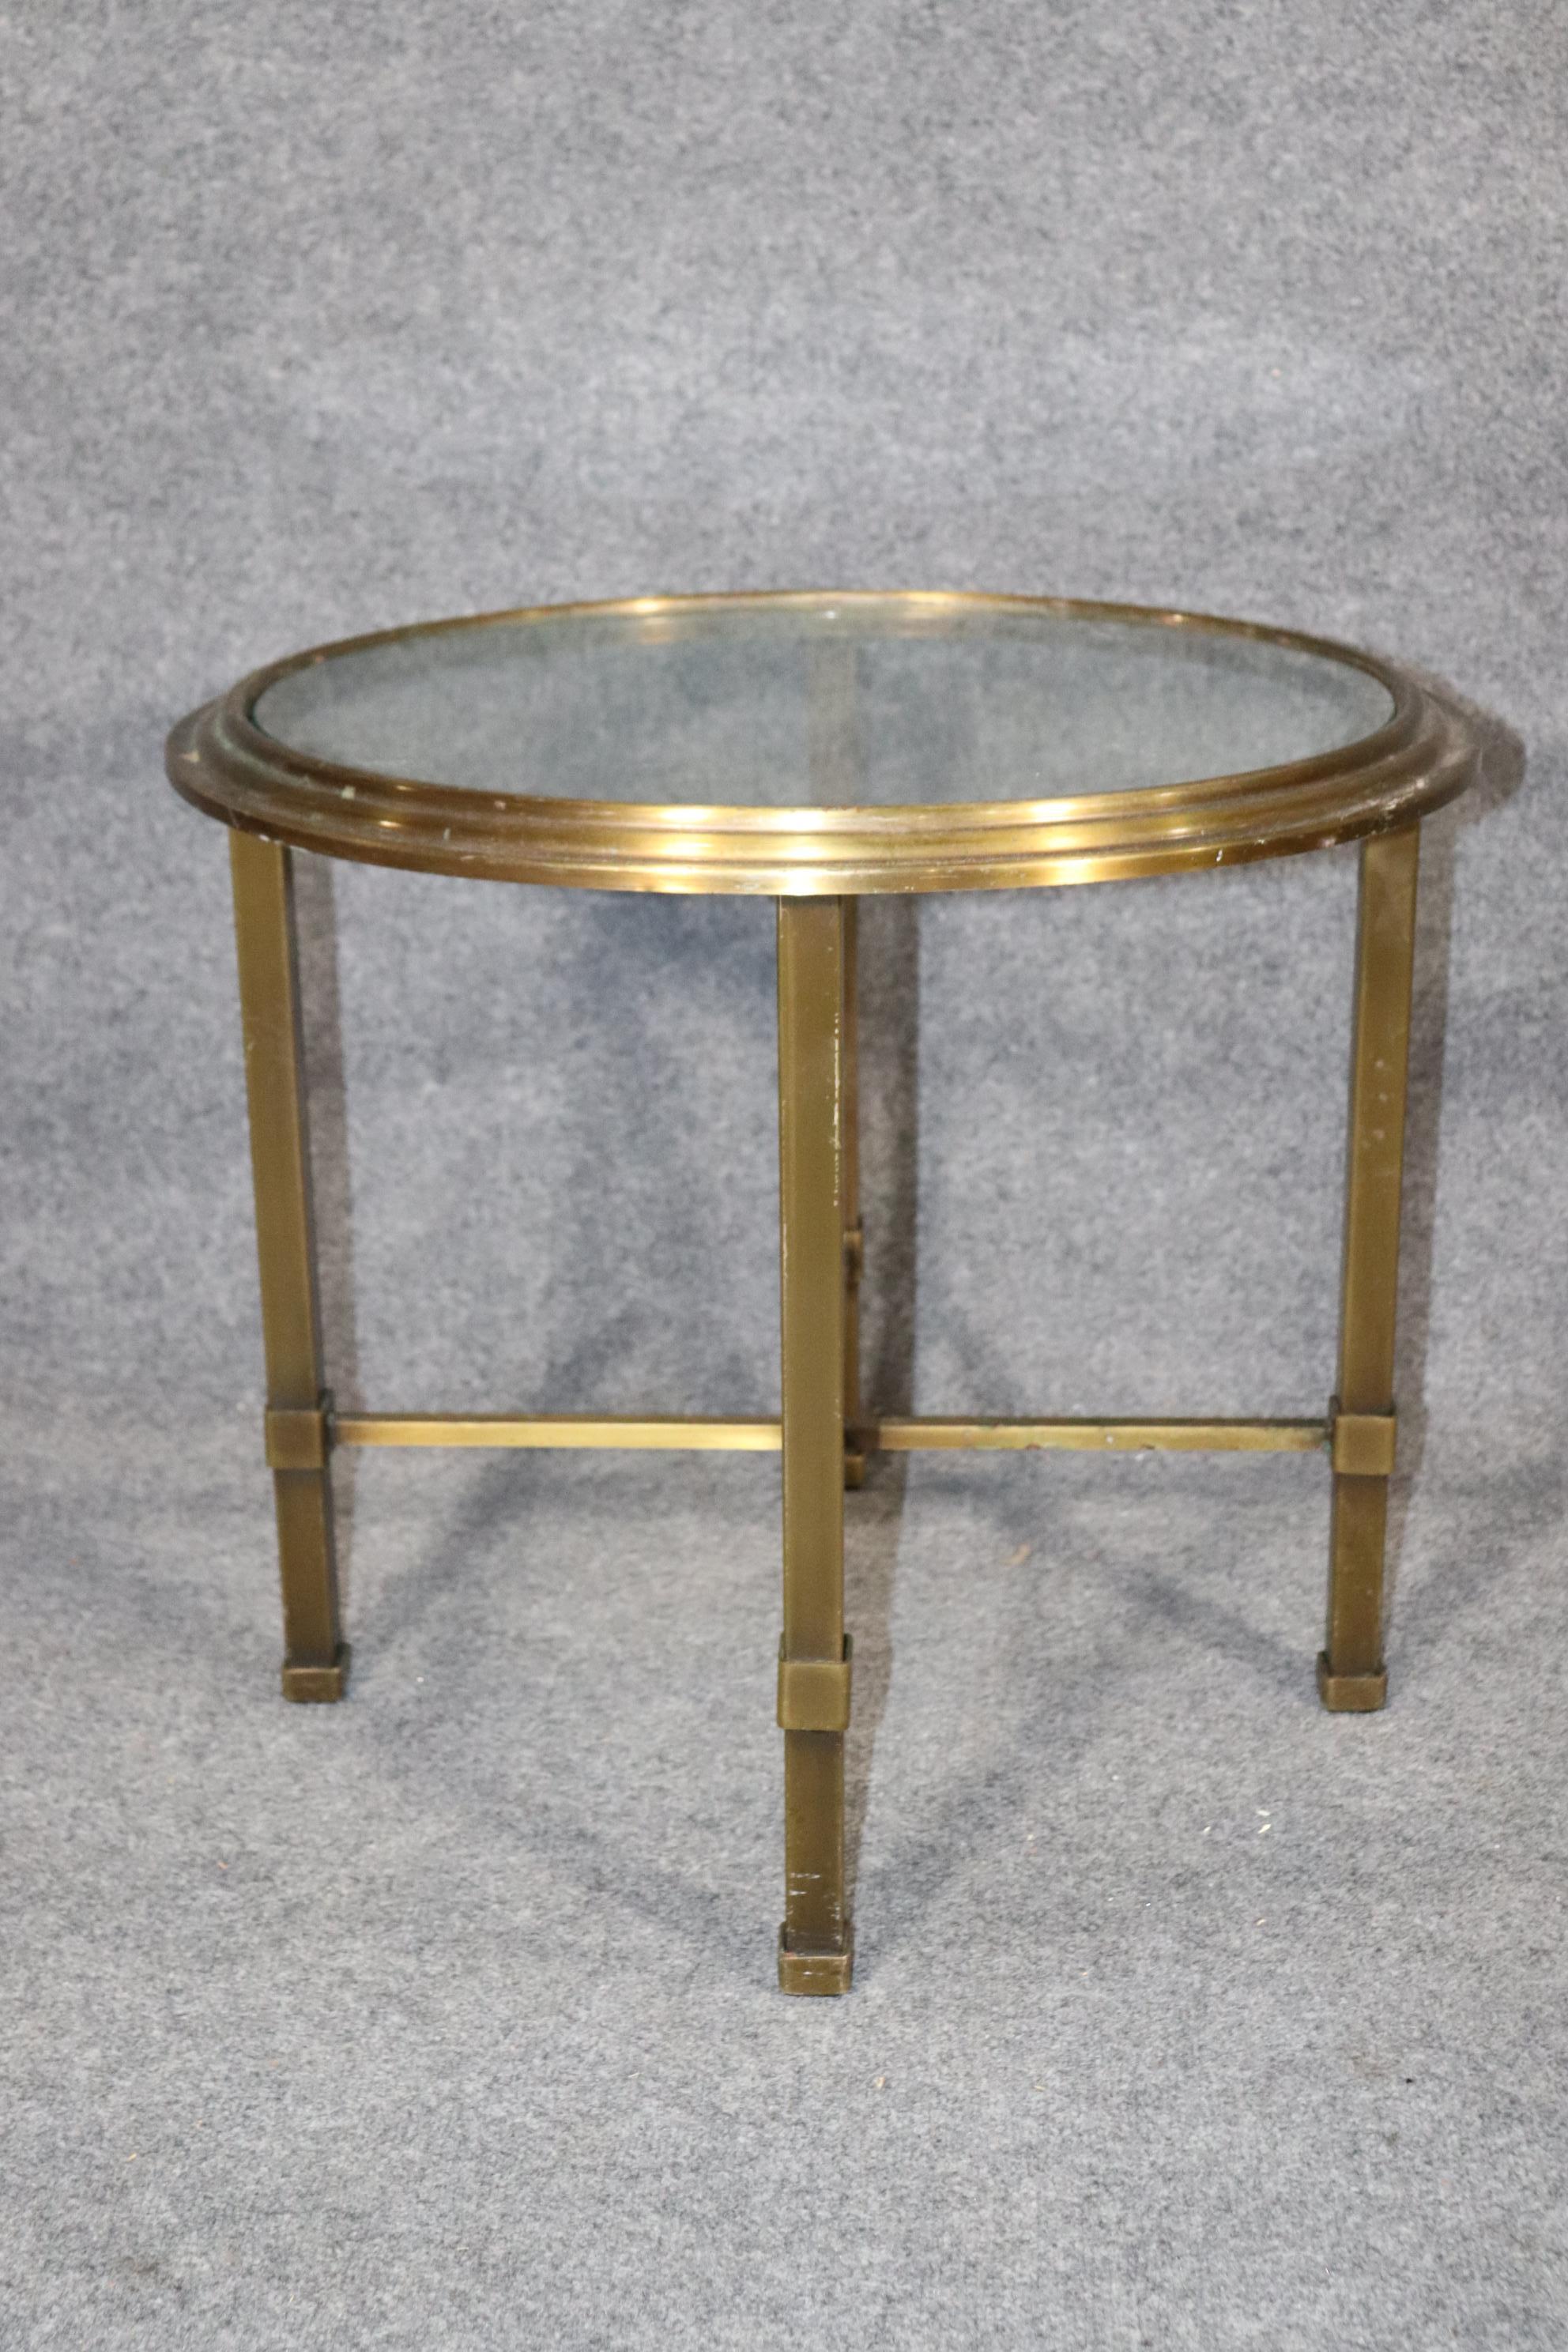 Late 20th Century Pair of Mid-Century Modern Brass and Glass Mastercraft Style Round End Tables